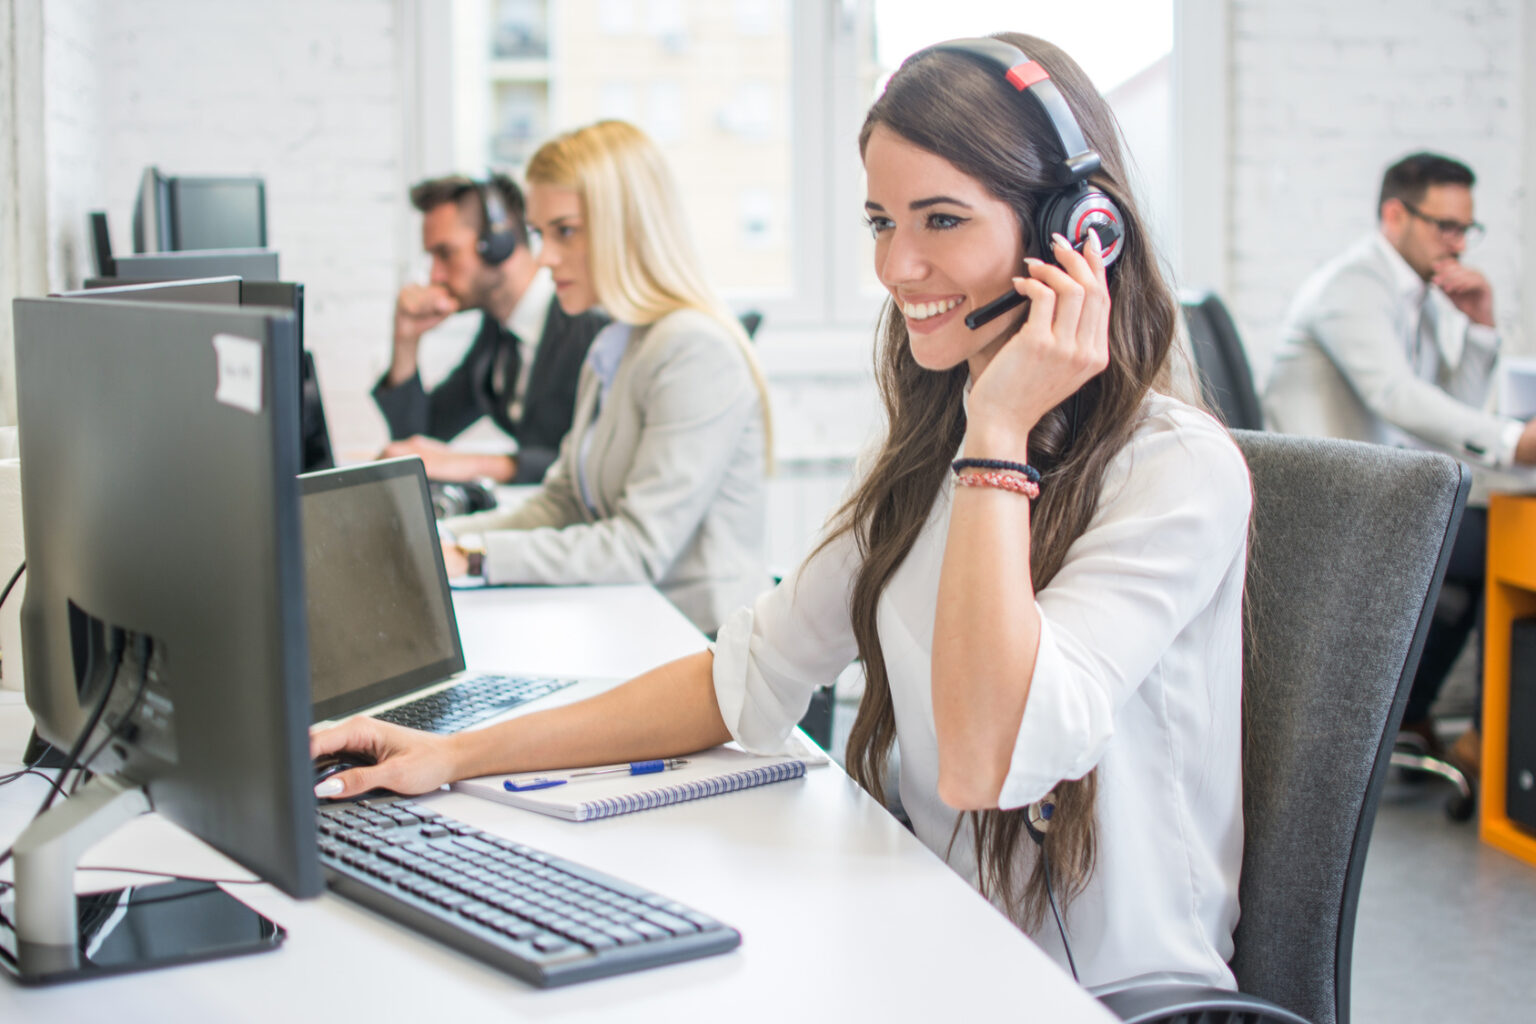 Each call center must determine which tactics work best for the company. The abovementioned techniques can help agents enhance consumer interactions.